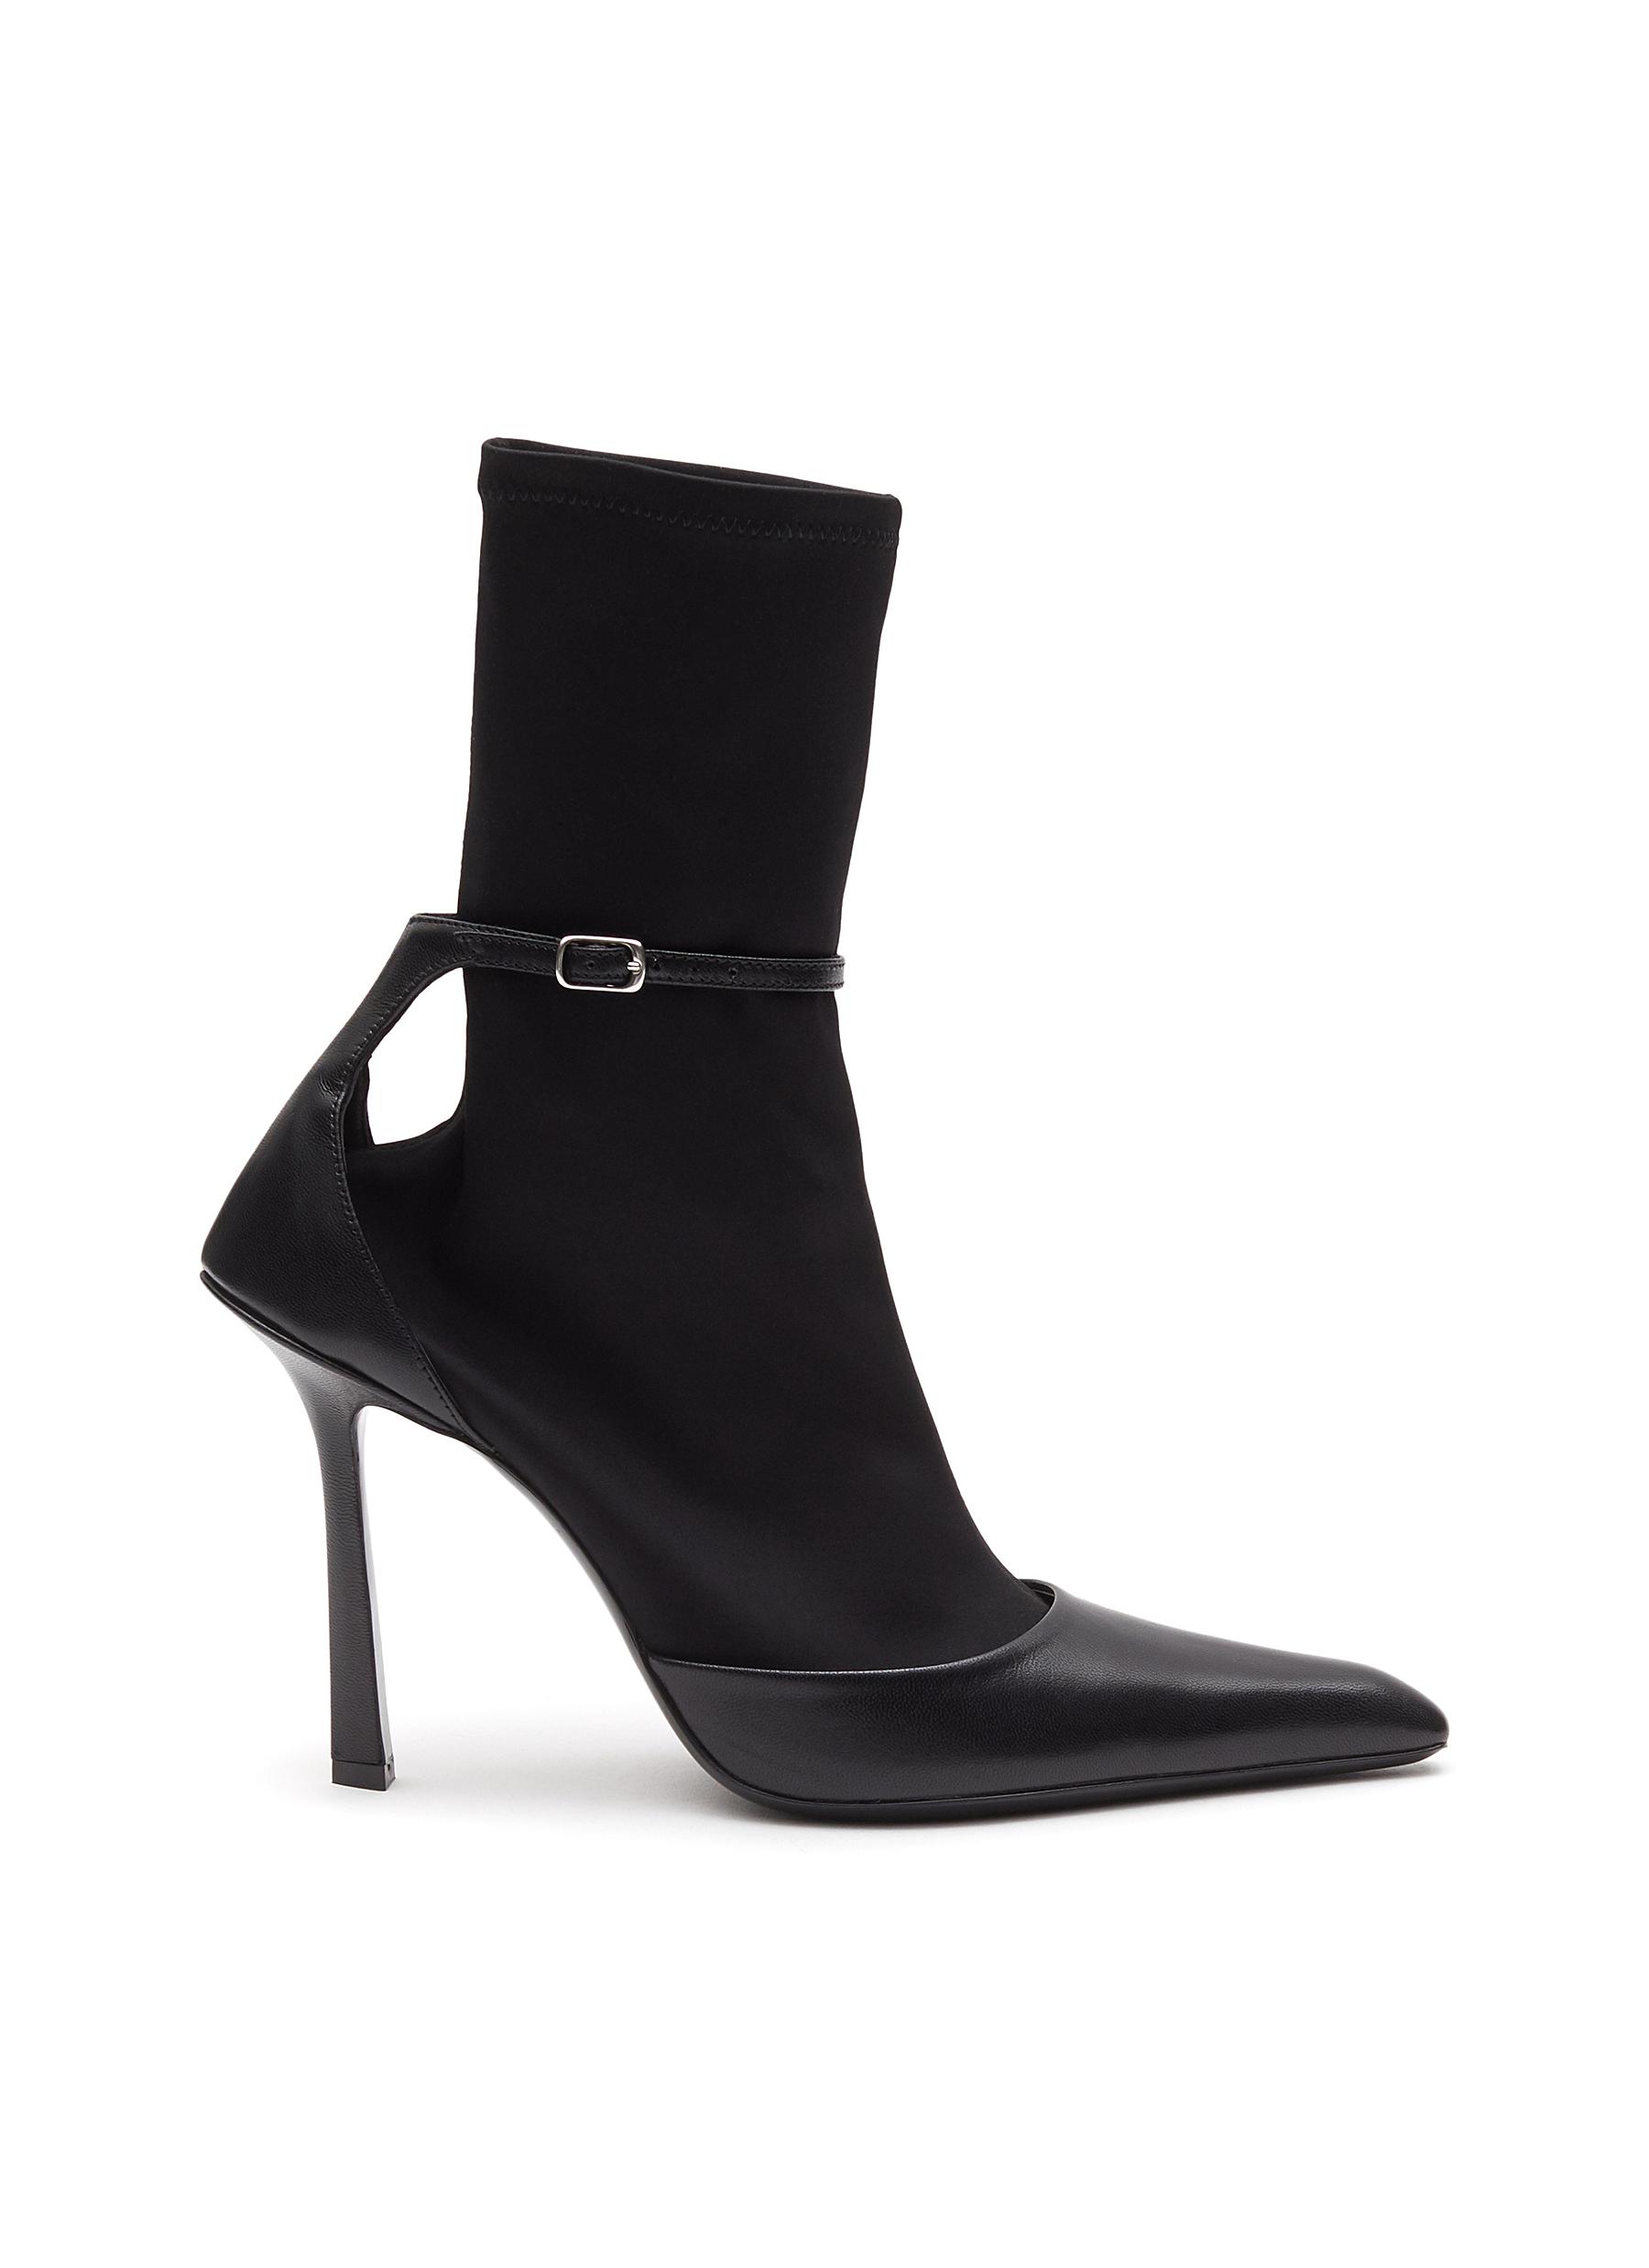 'Viola' Buckled Strap Ankle Sock Pointed Toe Heeled Boots